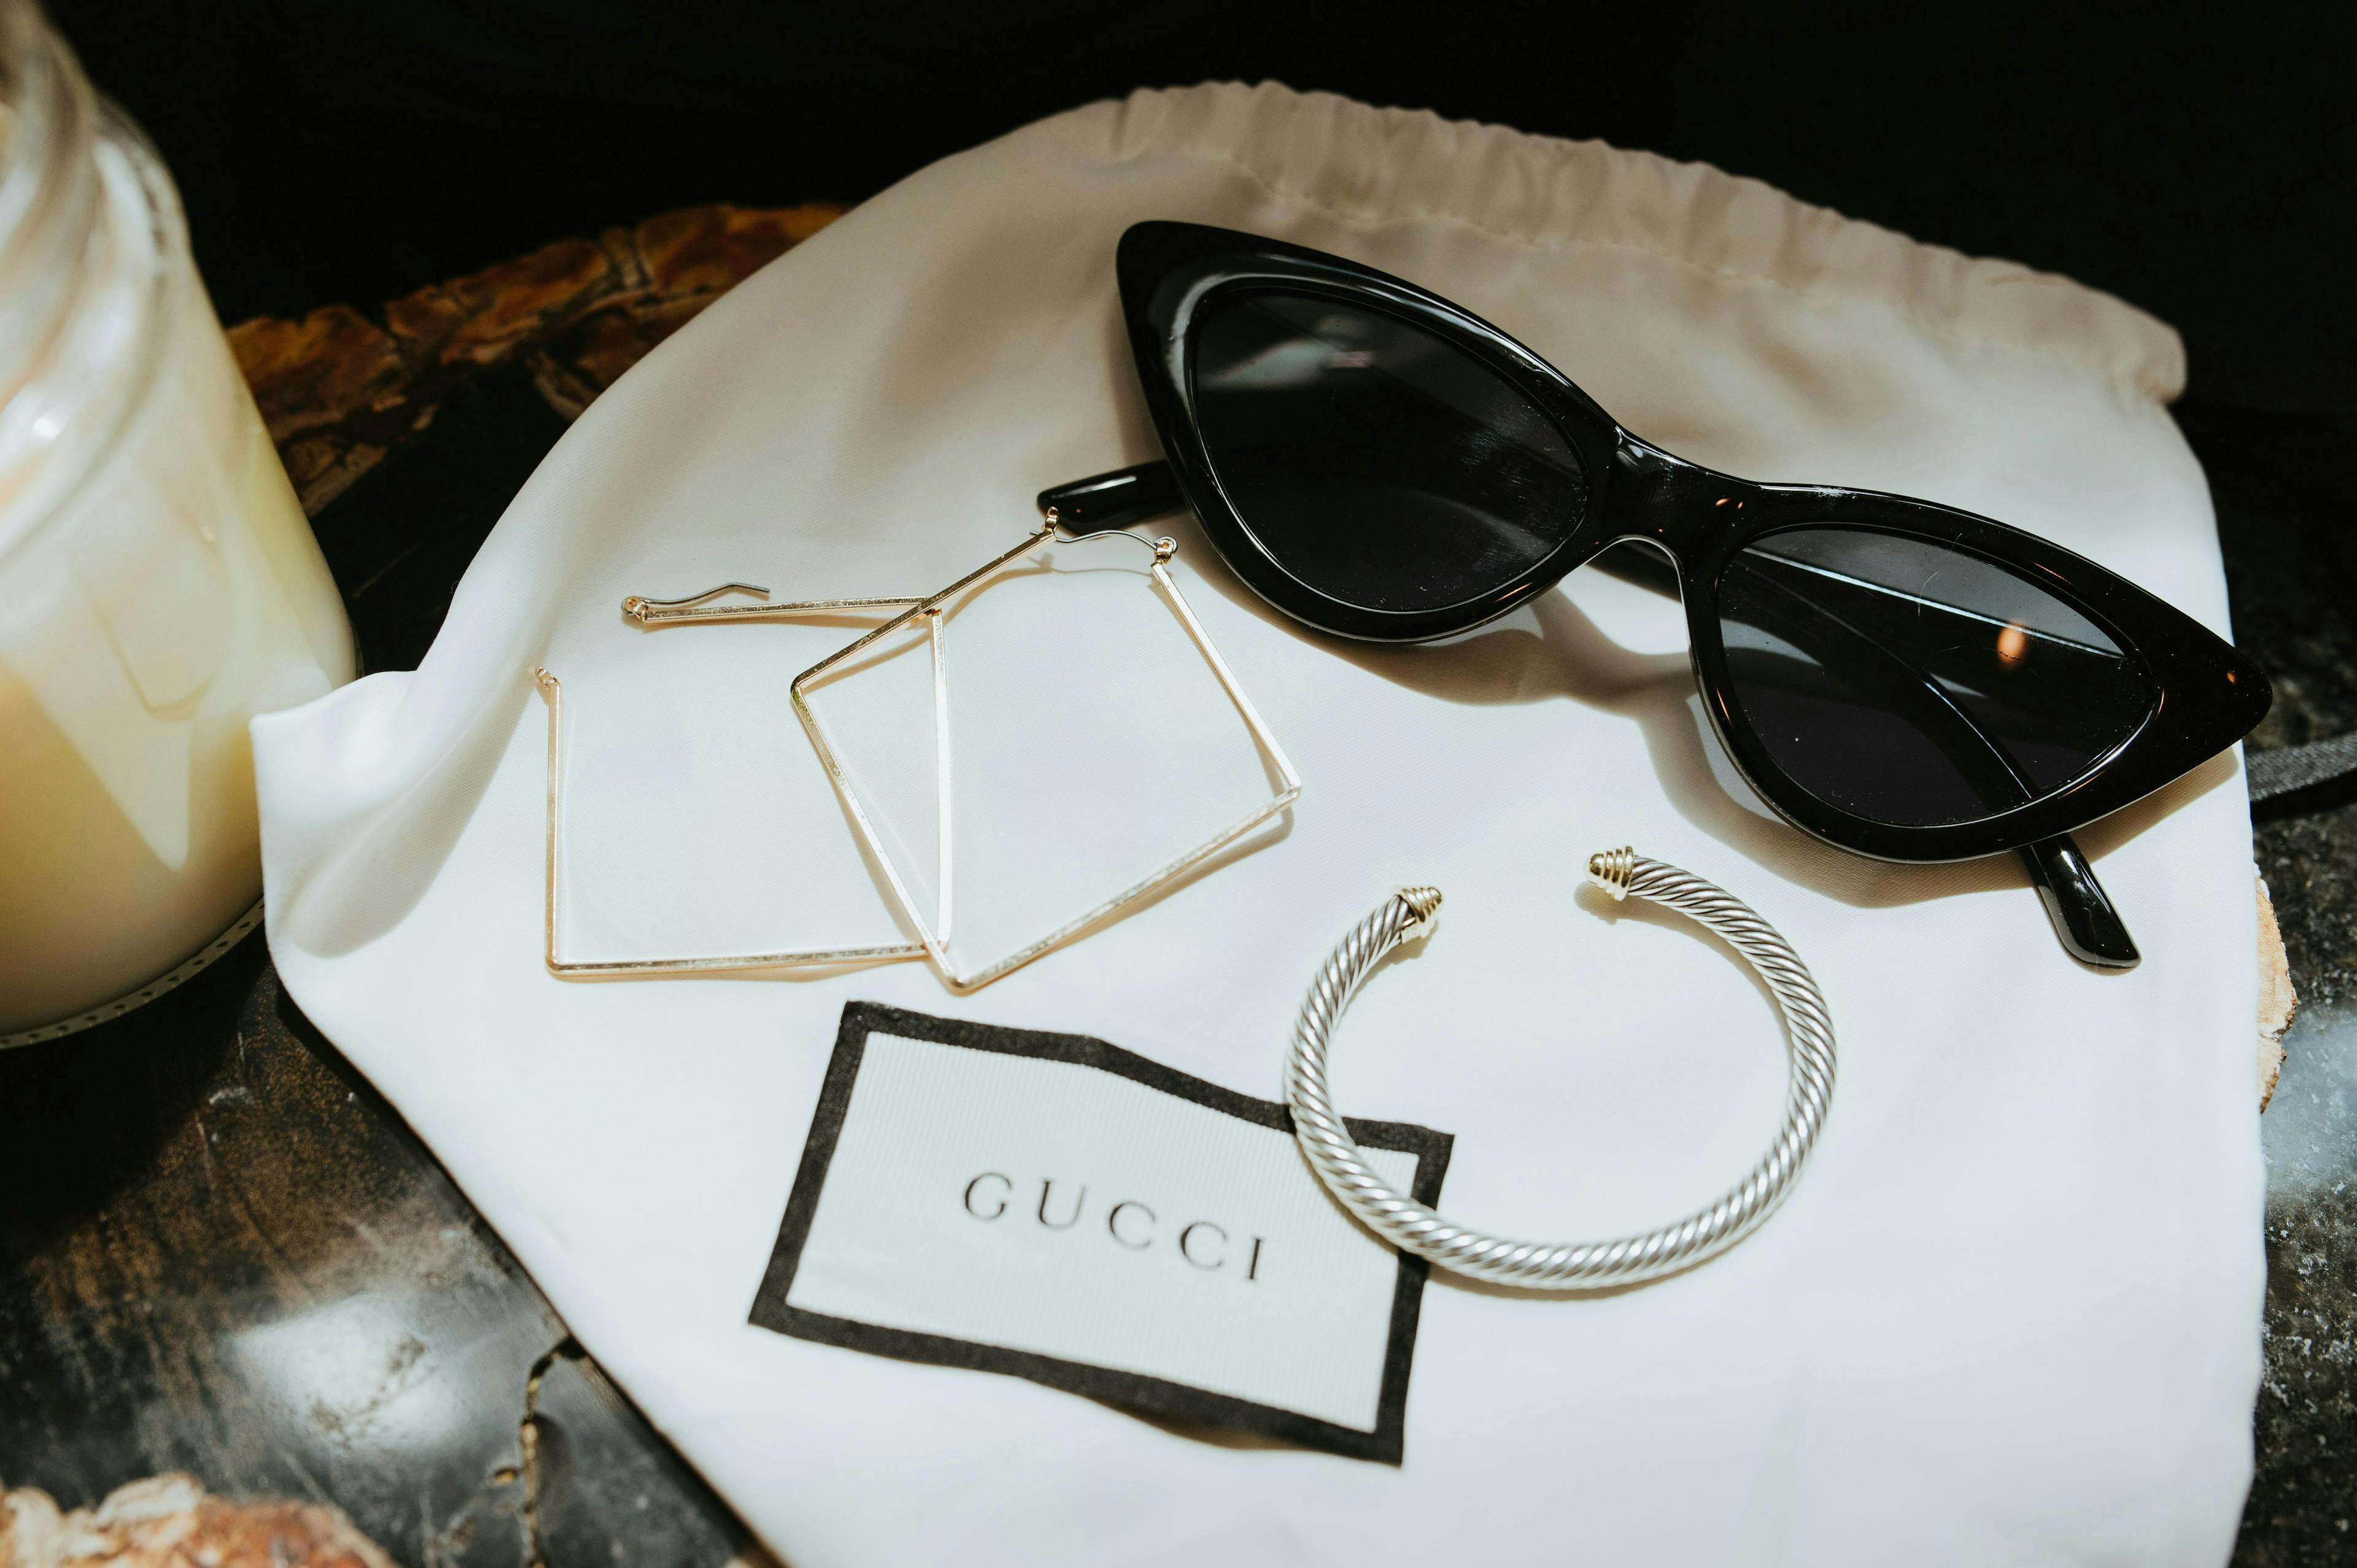 Gucci sunglasses and earrings with Gucci brand name. 